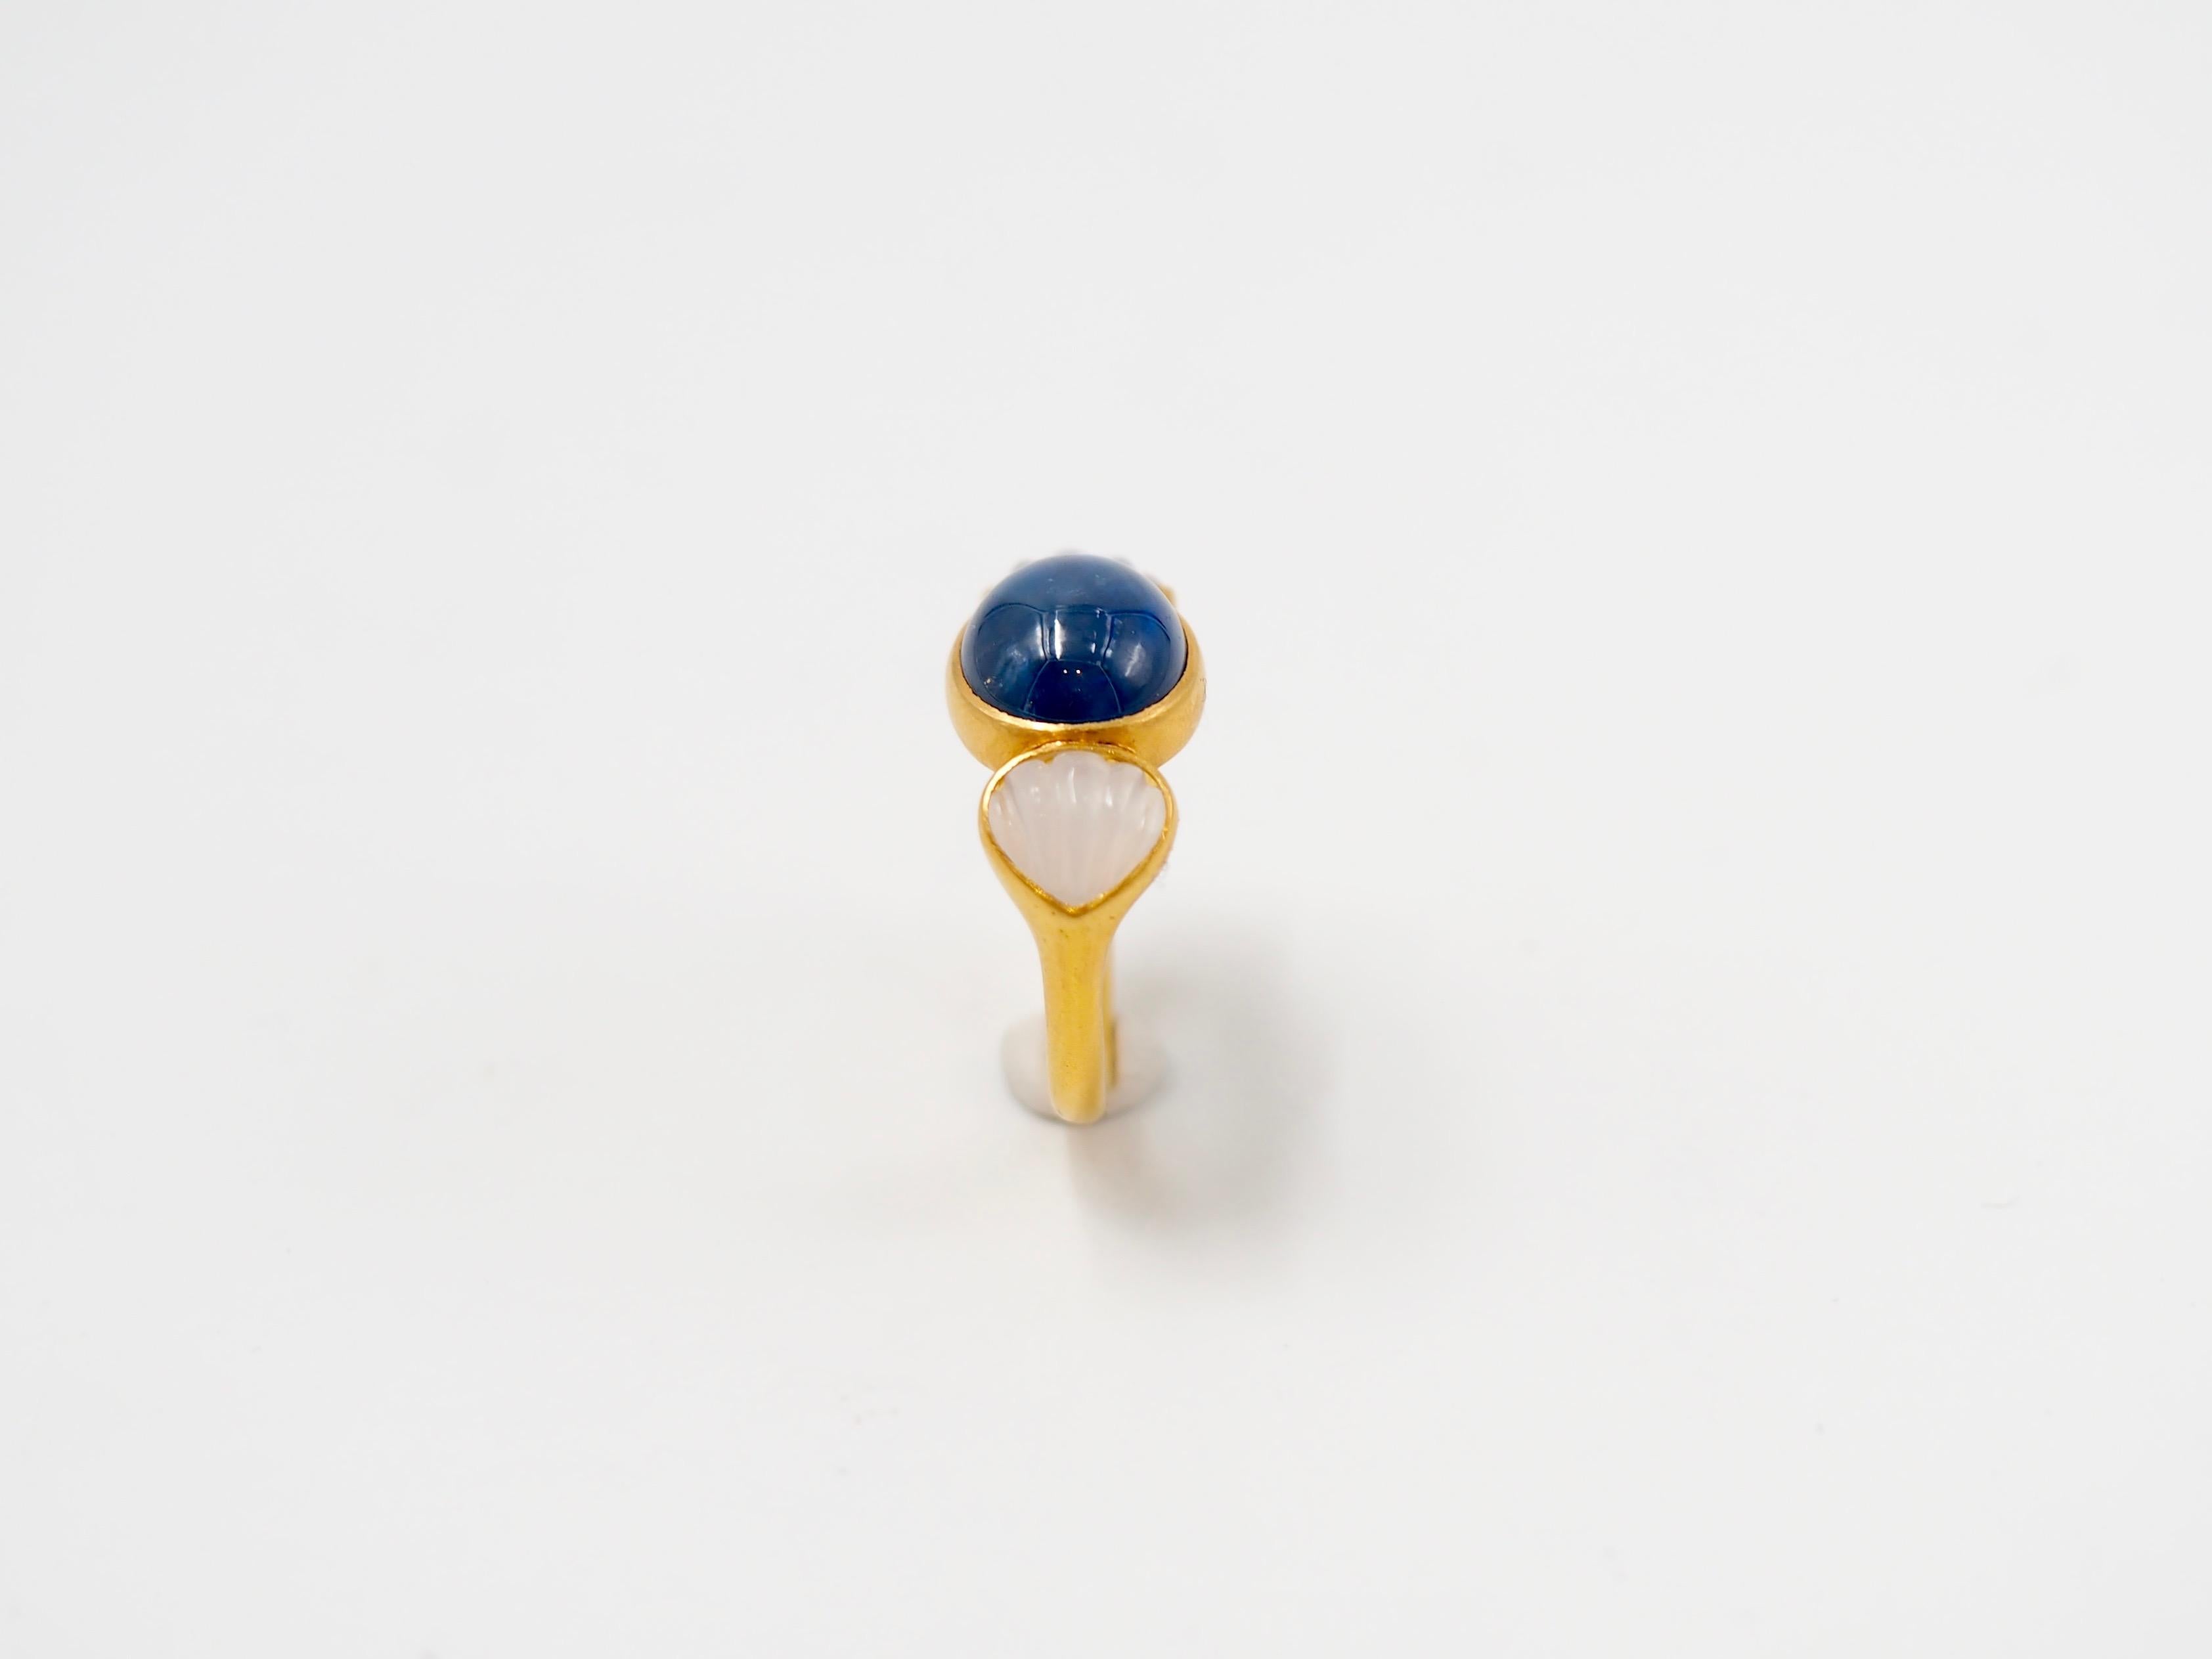 Scrives 7.58 carat Blue Sapphire Cabochon White Chalcedony 22 Karat Gold Ring For Sale 2